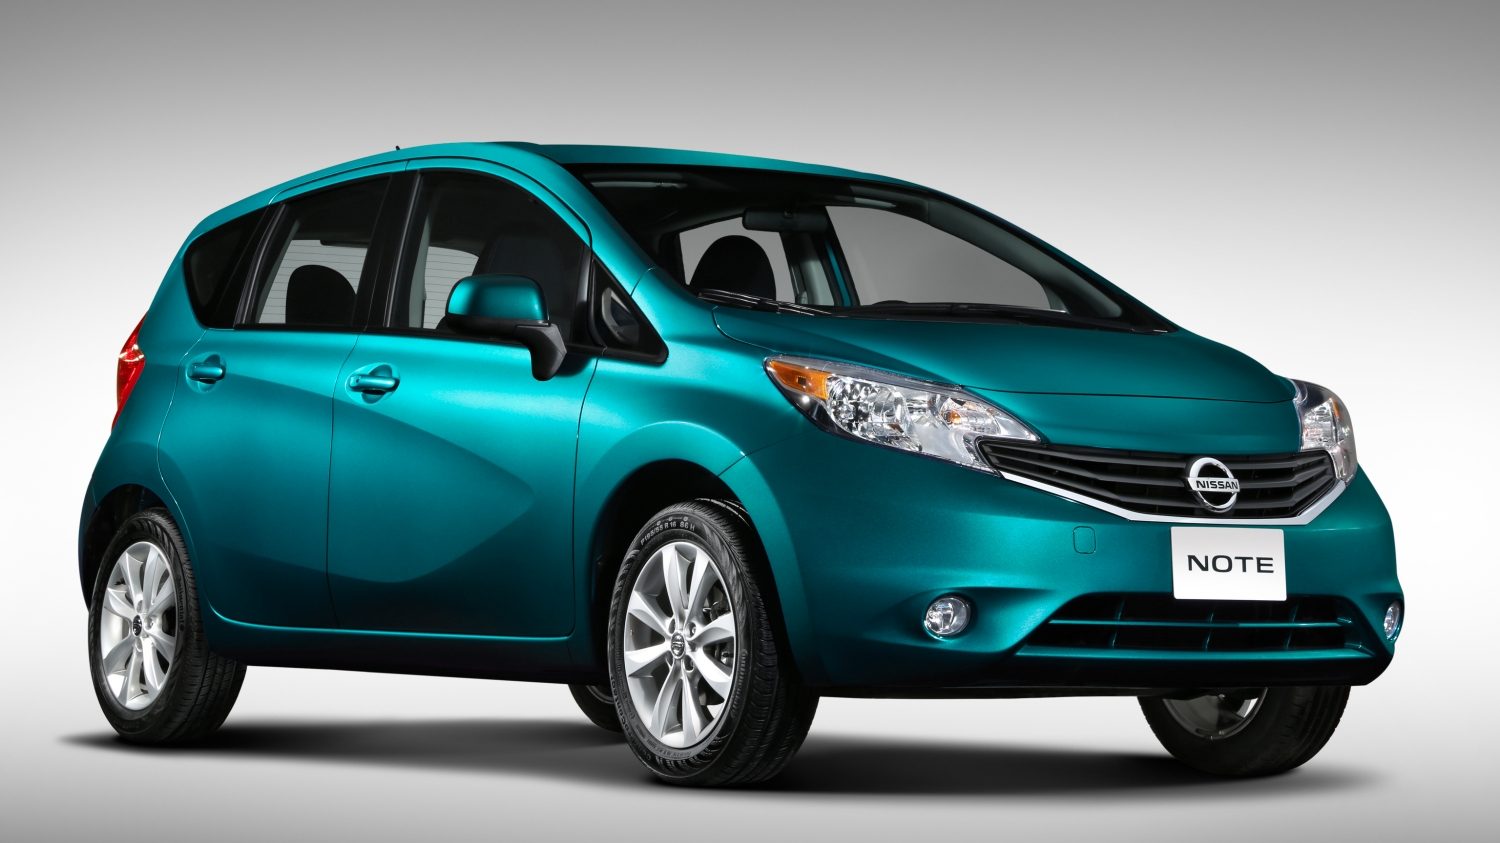 CATEGORY D: Nissan Note